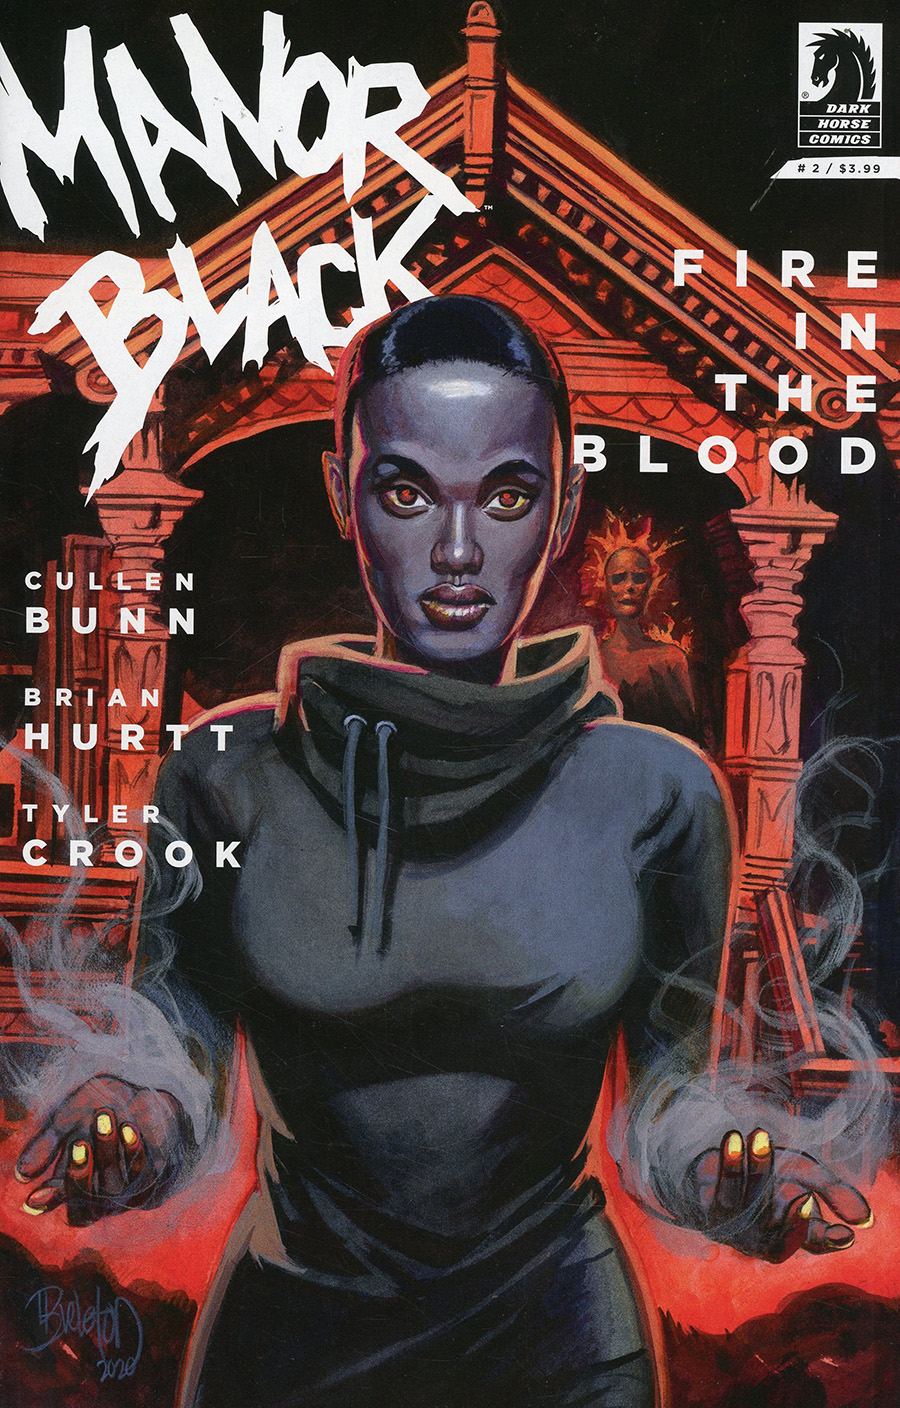 Manor Black Fire In The Blood #2 Cover B Variant Dan Brereton Cover